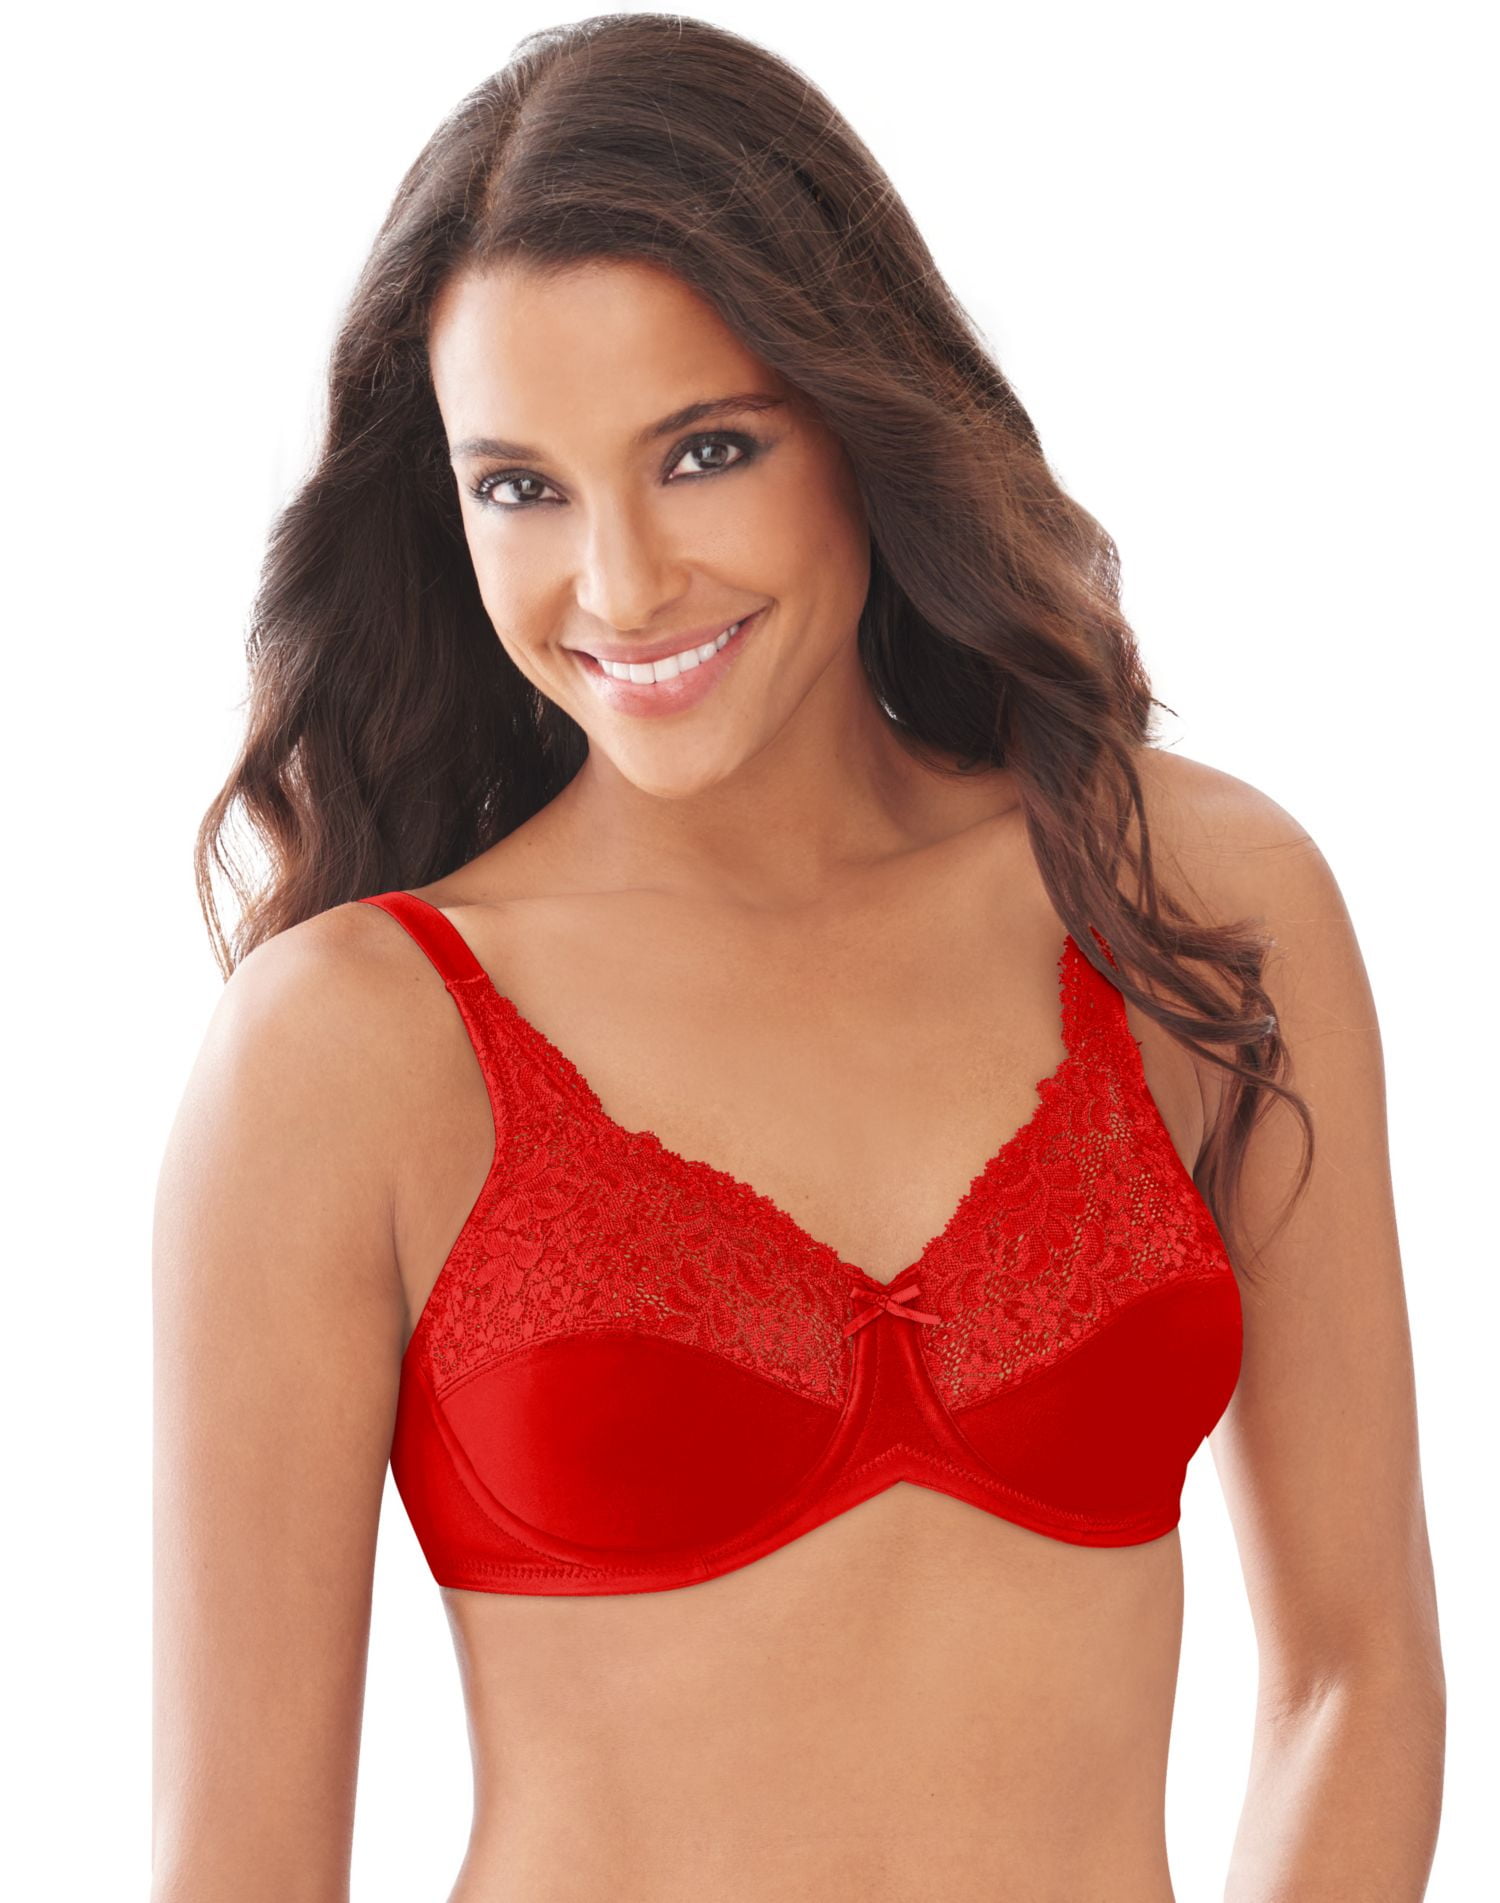 Lilyette by Bali Womens Tailored Minimizer Bra with Lace Trim -  Best-Seller, 38 